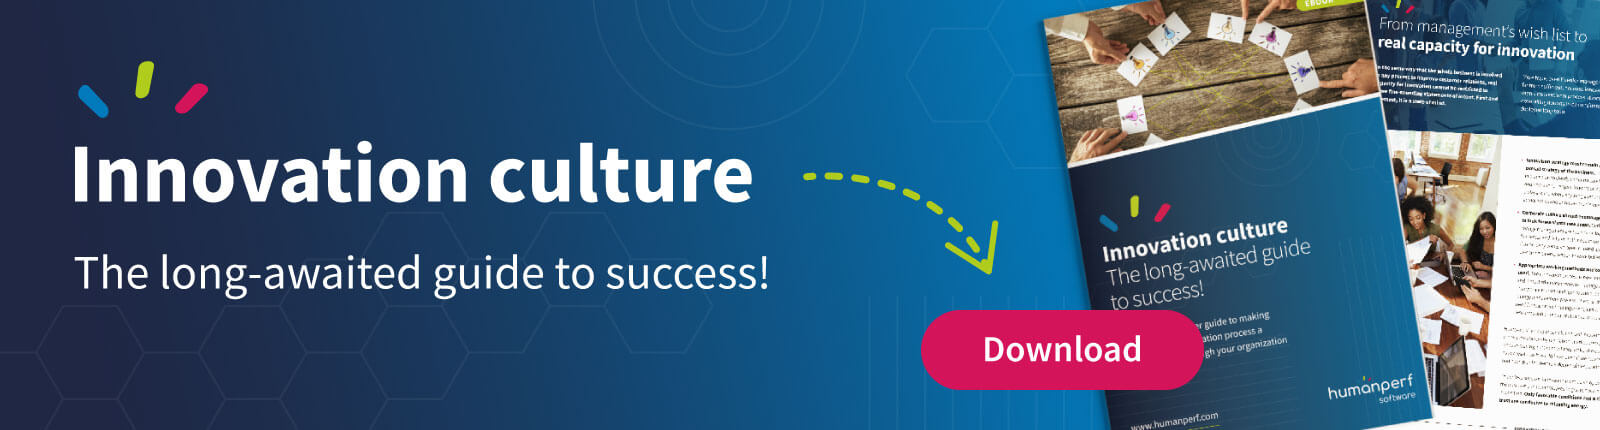 Innovation culture: the long-awaited guide to success!